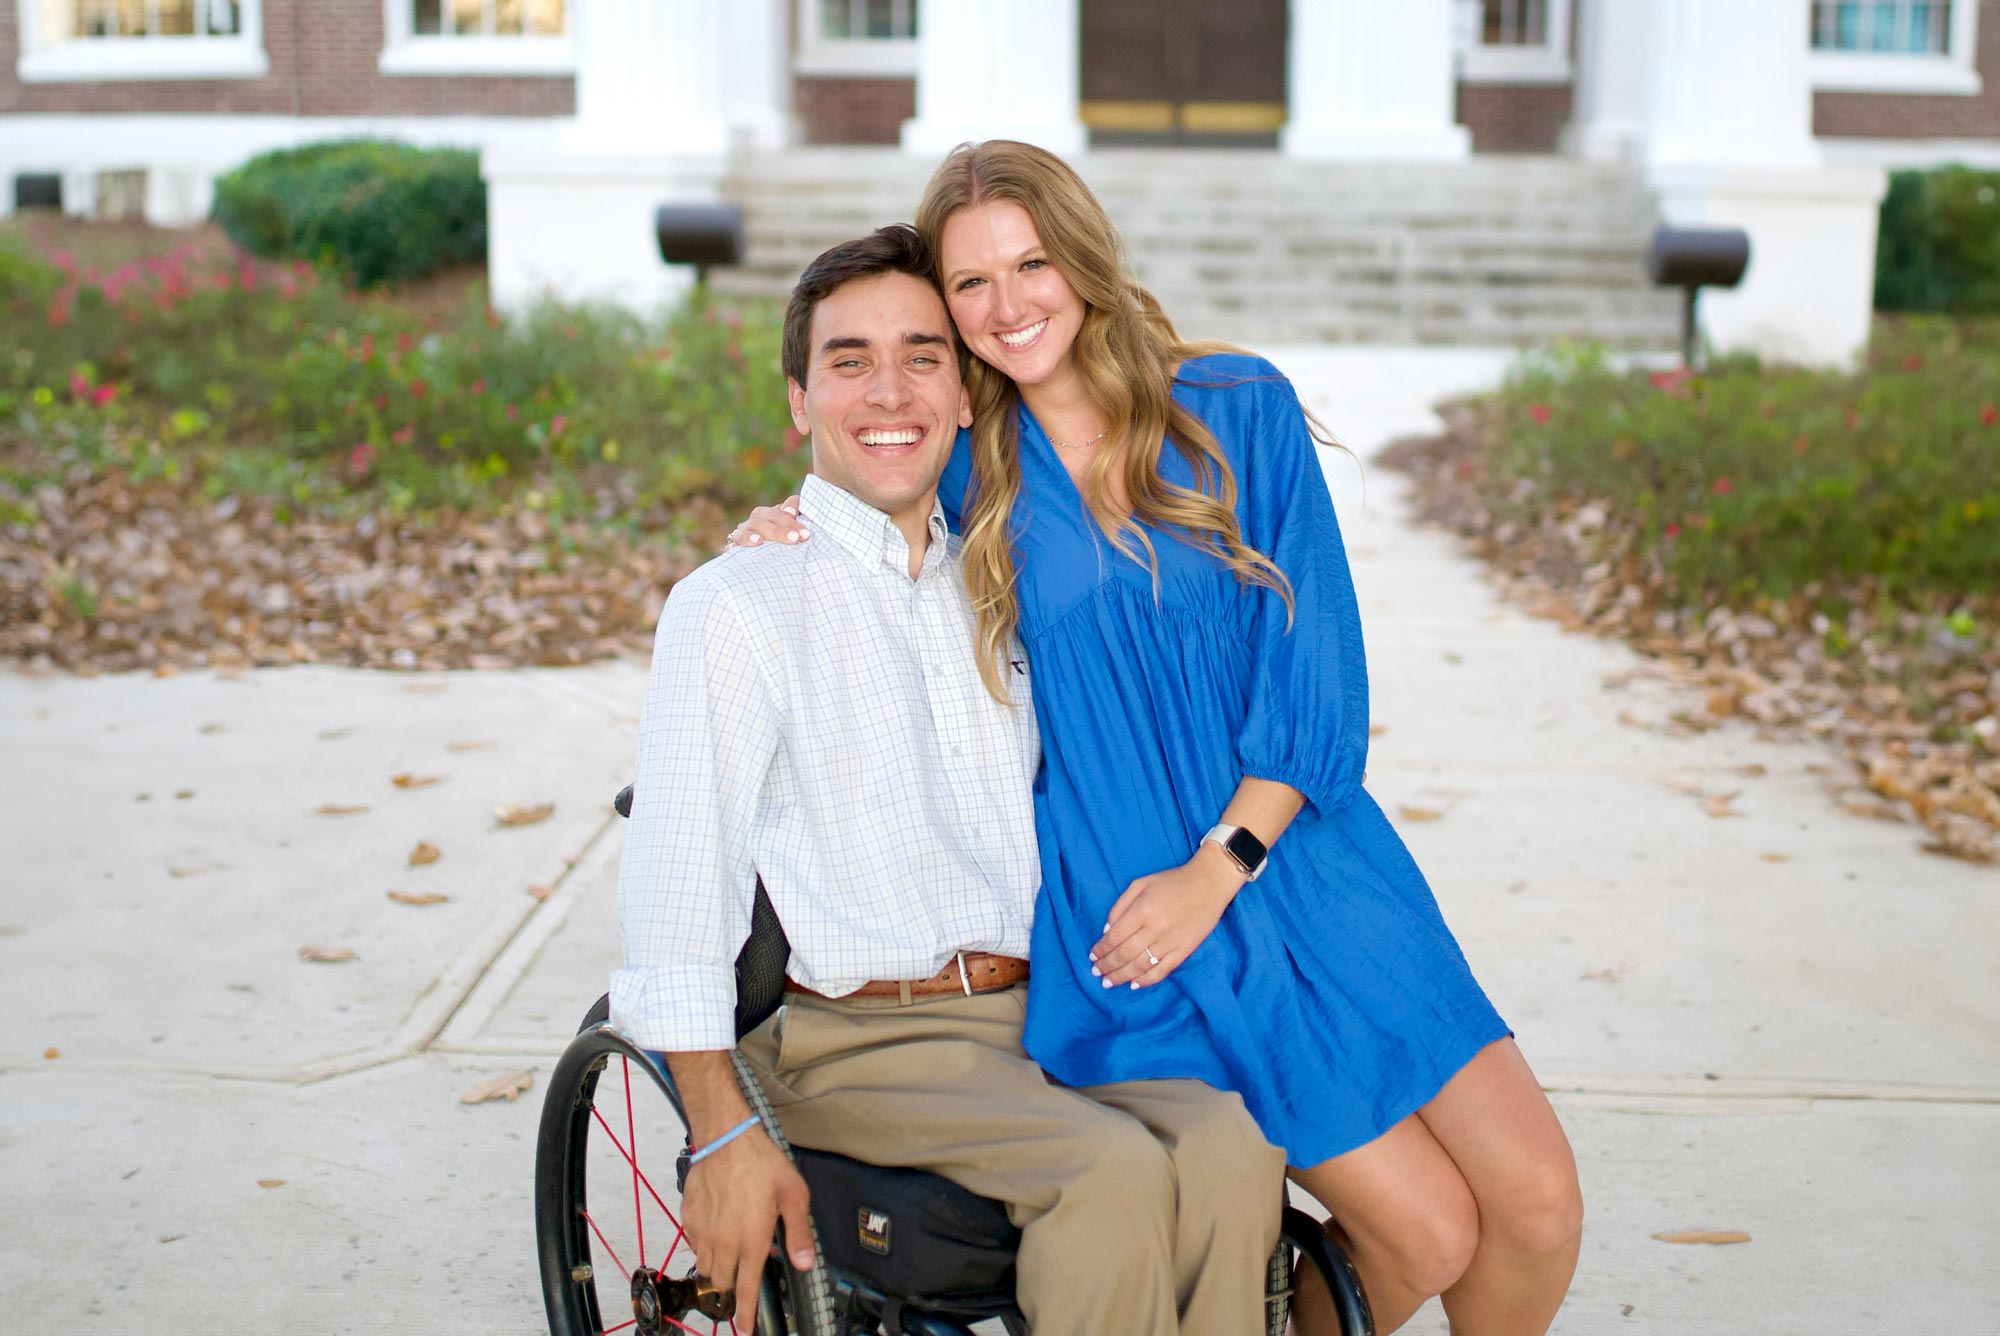 A man and woman in a wheelchair posing for a photo.